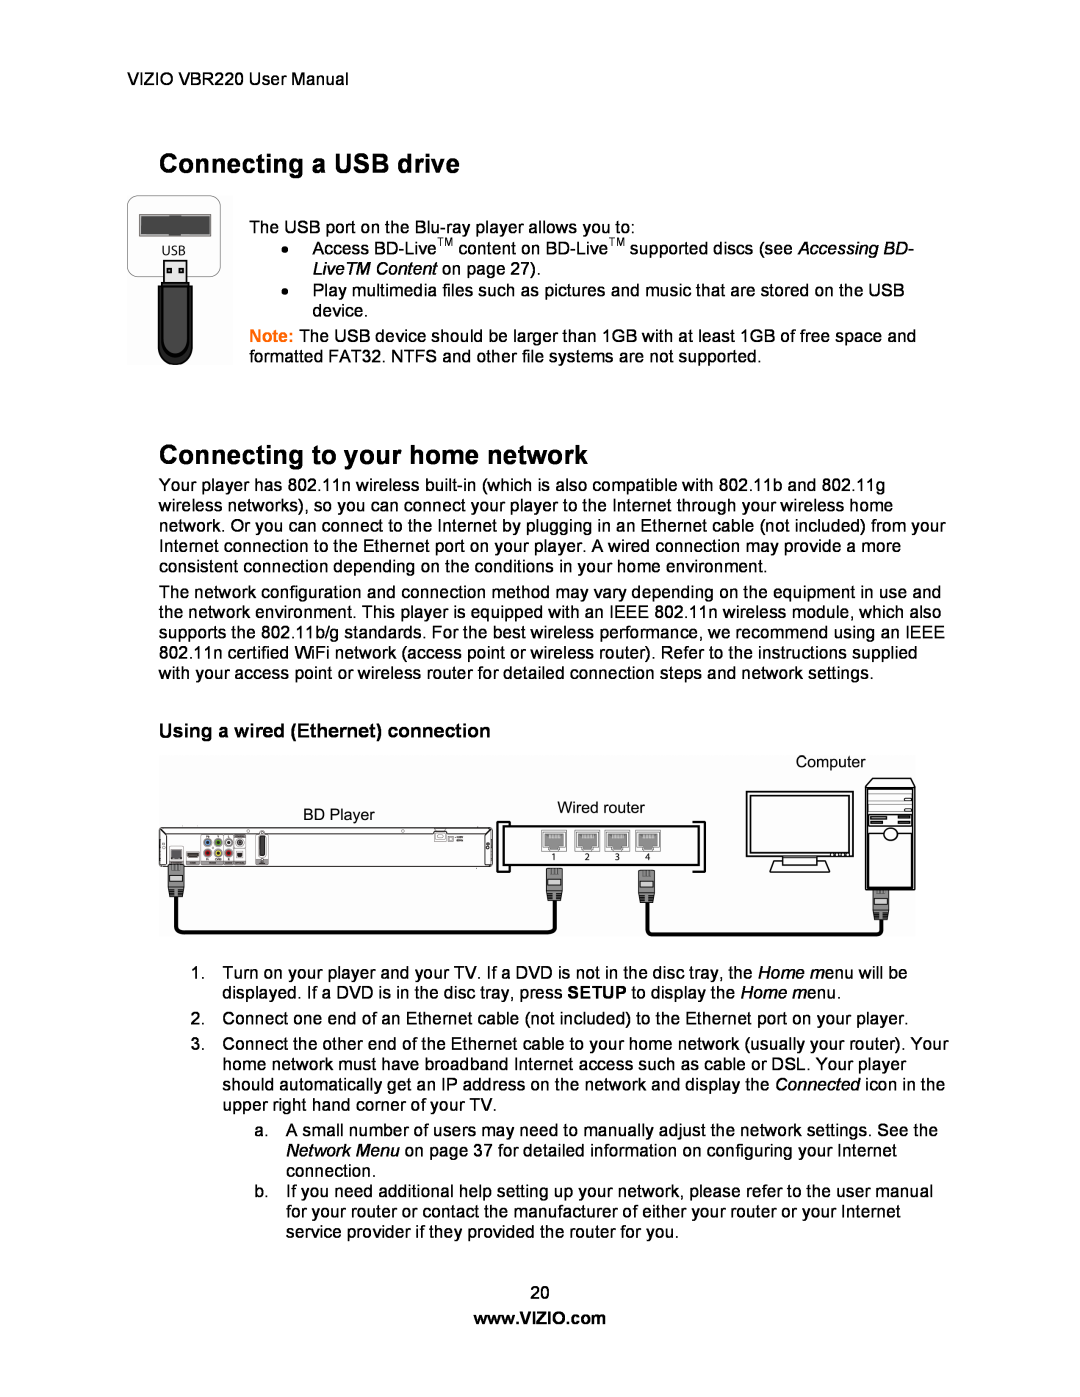 Panasonic VBR220 user manual Connecting a USB drive, Connecting to your home network, Using a wired Ethernet connection 